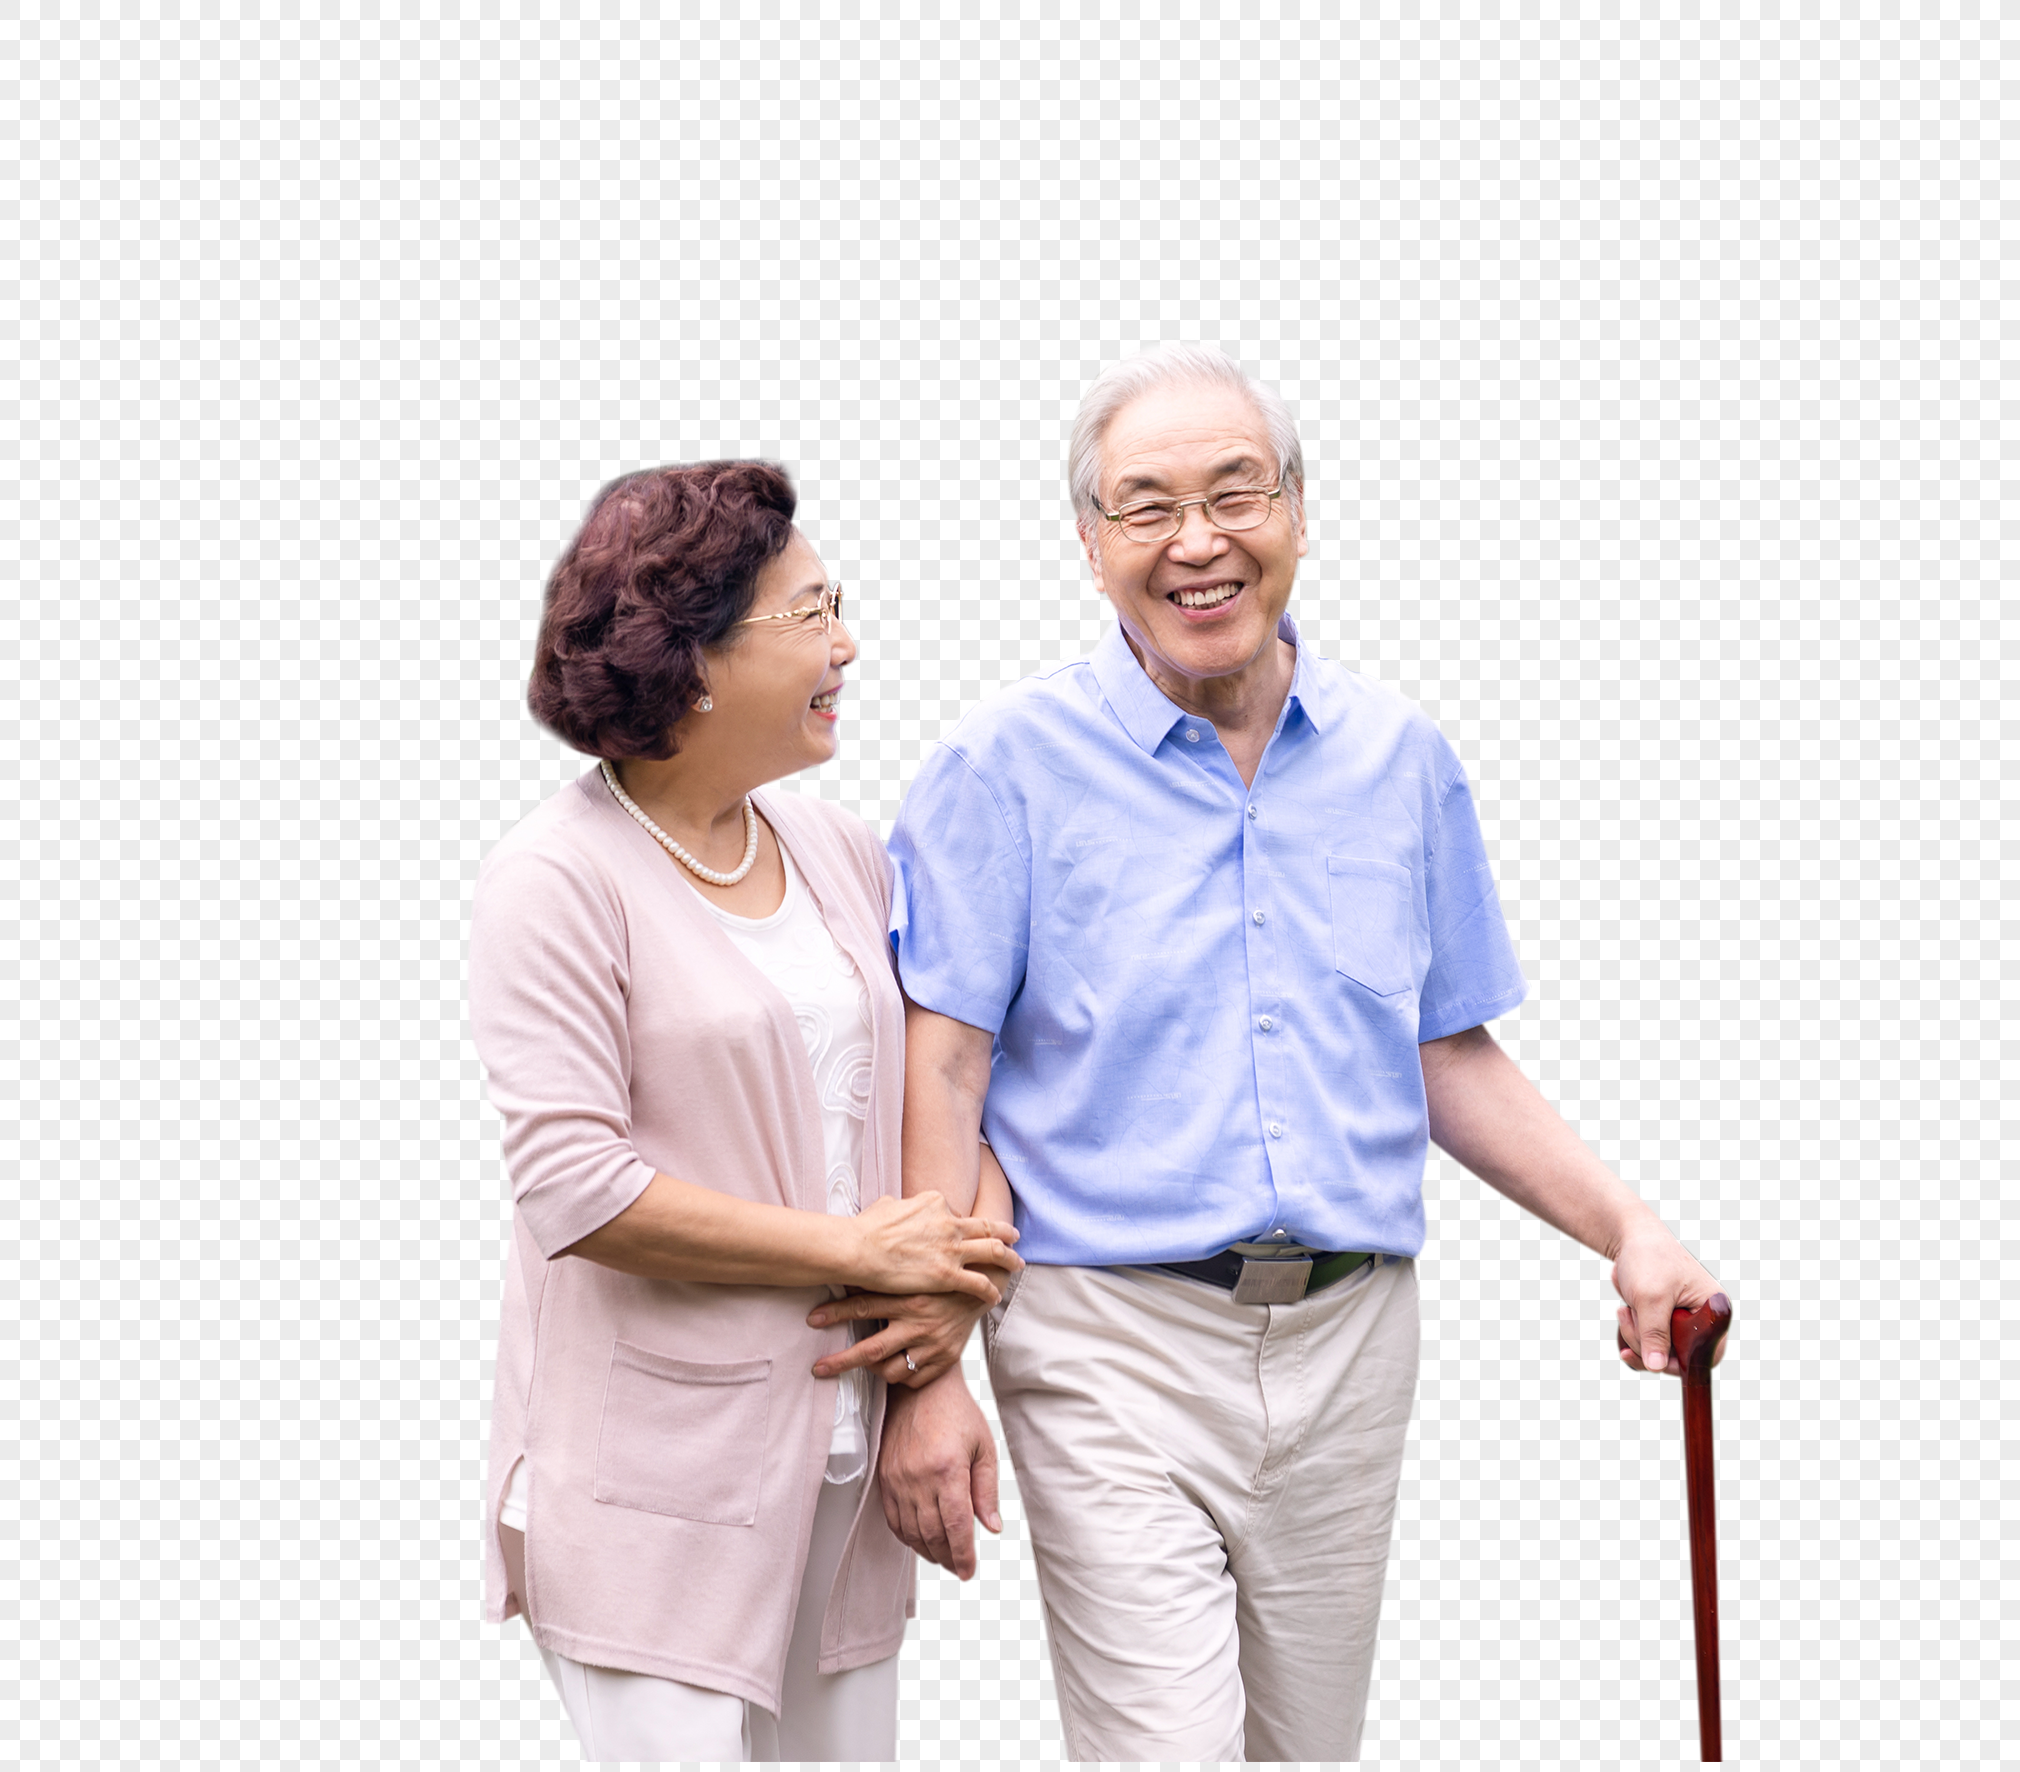 Three elderly people running happily, holding hands png download -  3916*3248 - Free Transparent Elderly People Running png Download. -  CleanPNG / KissPNG